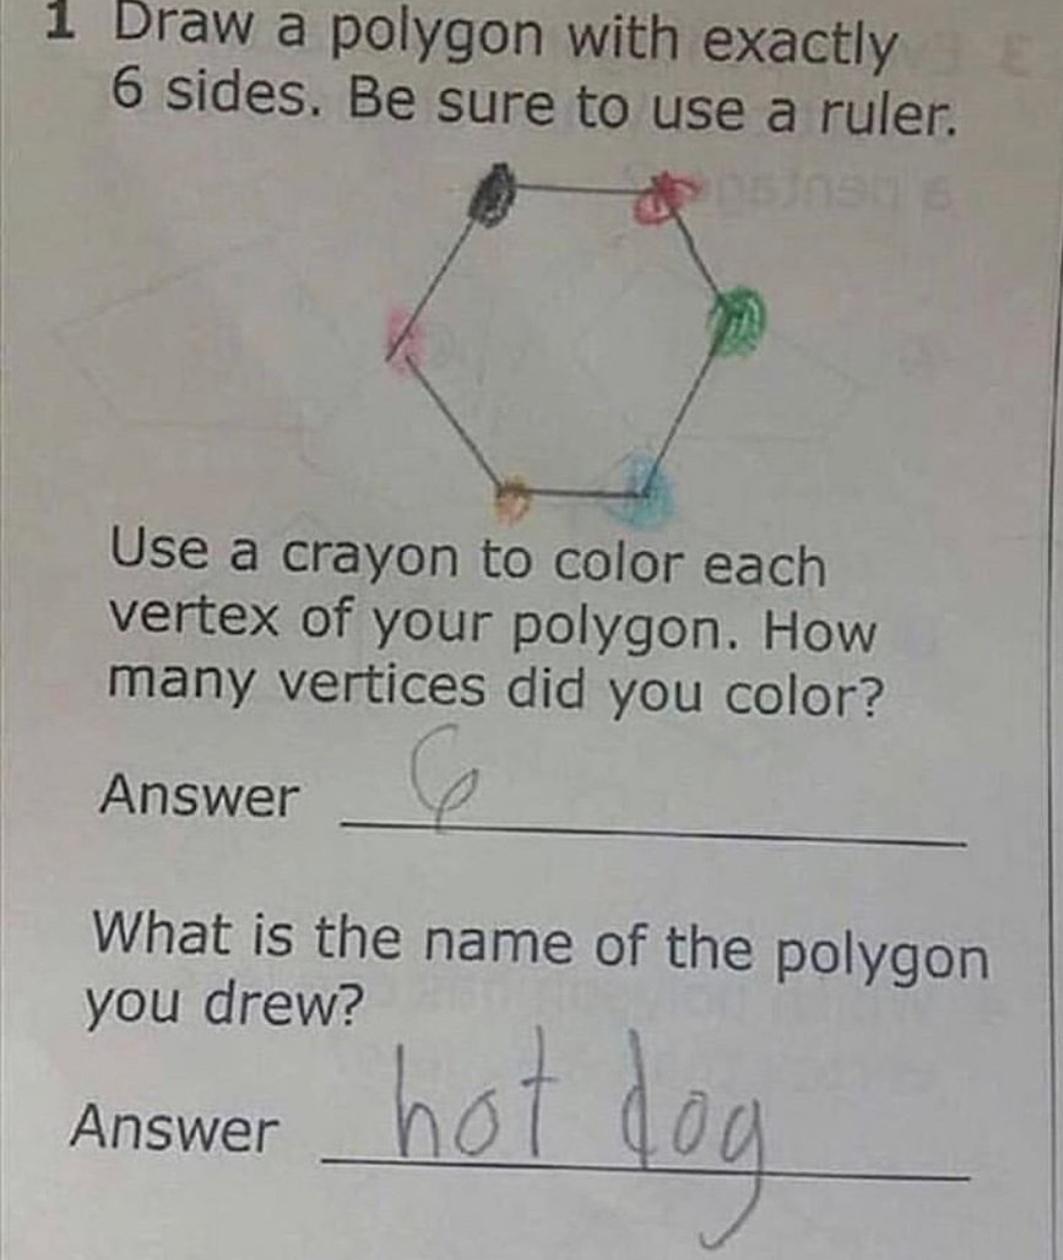 writing - 1 Draw a polygon with exactly 6 sides. Be sure to use a ruler. Use a crayon to color each vertex of your polygon. How many vertices did you color? Answer What is the name of the polygon you drew? Answer hot dog